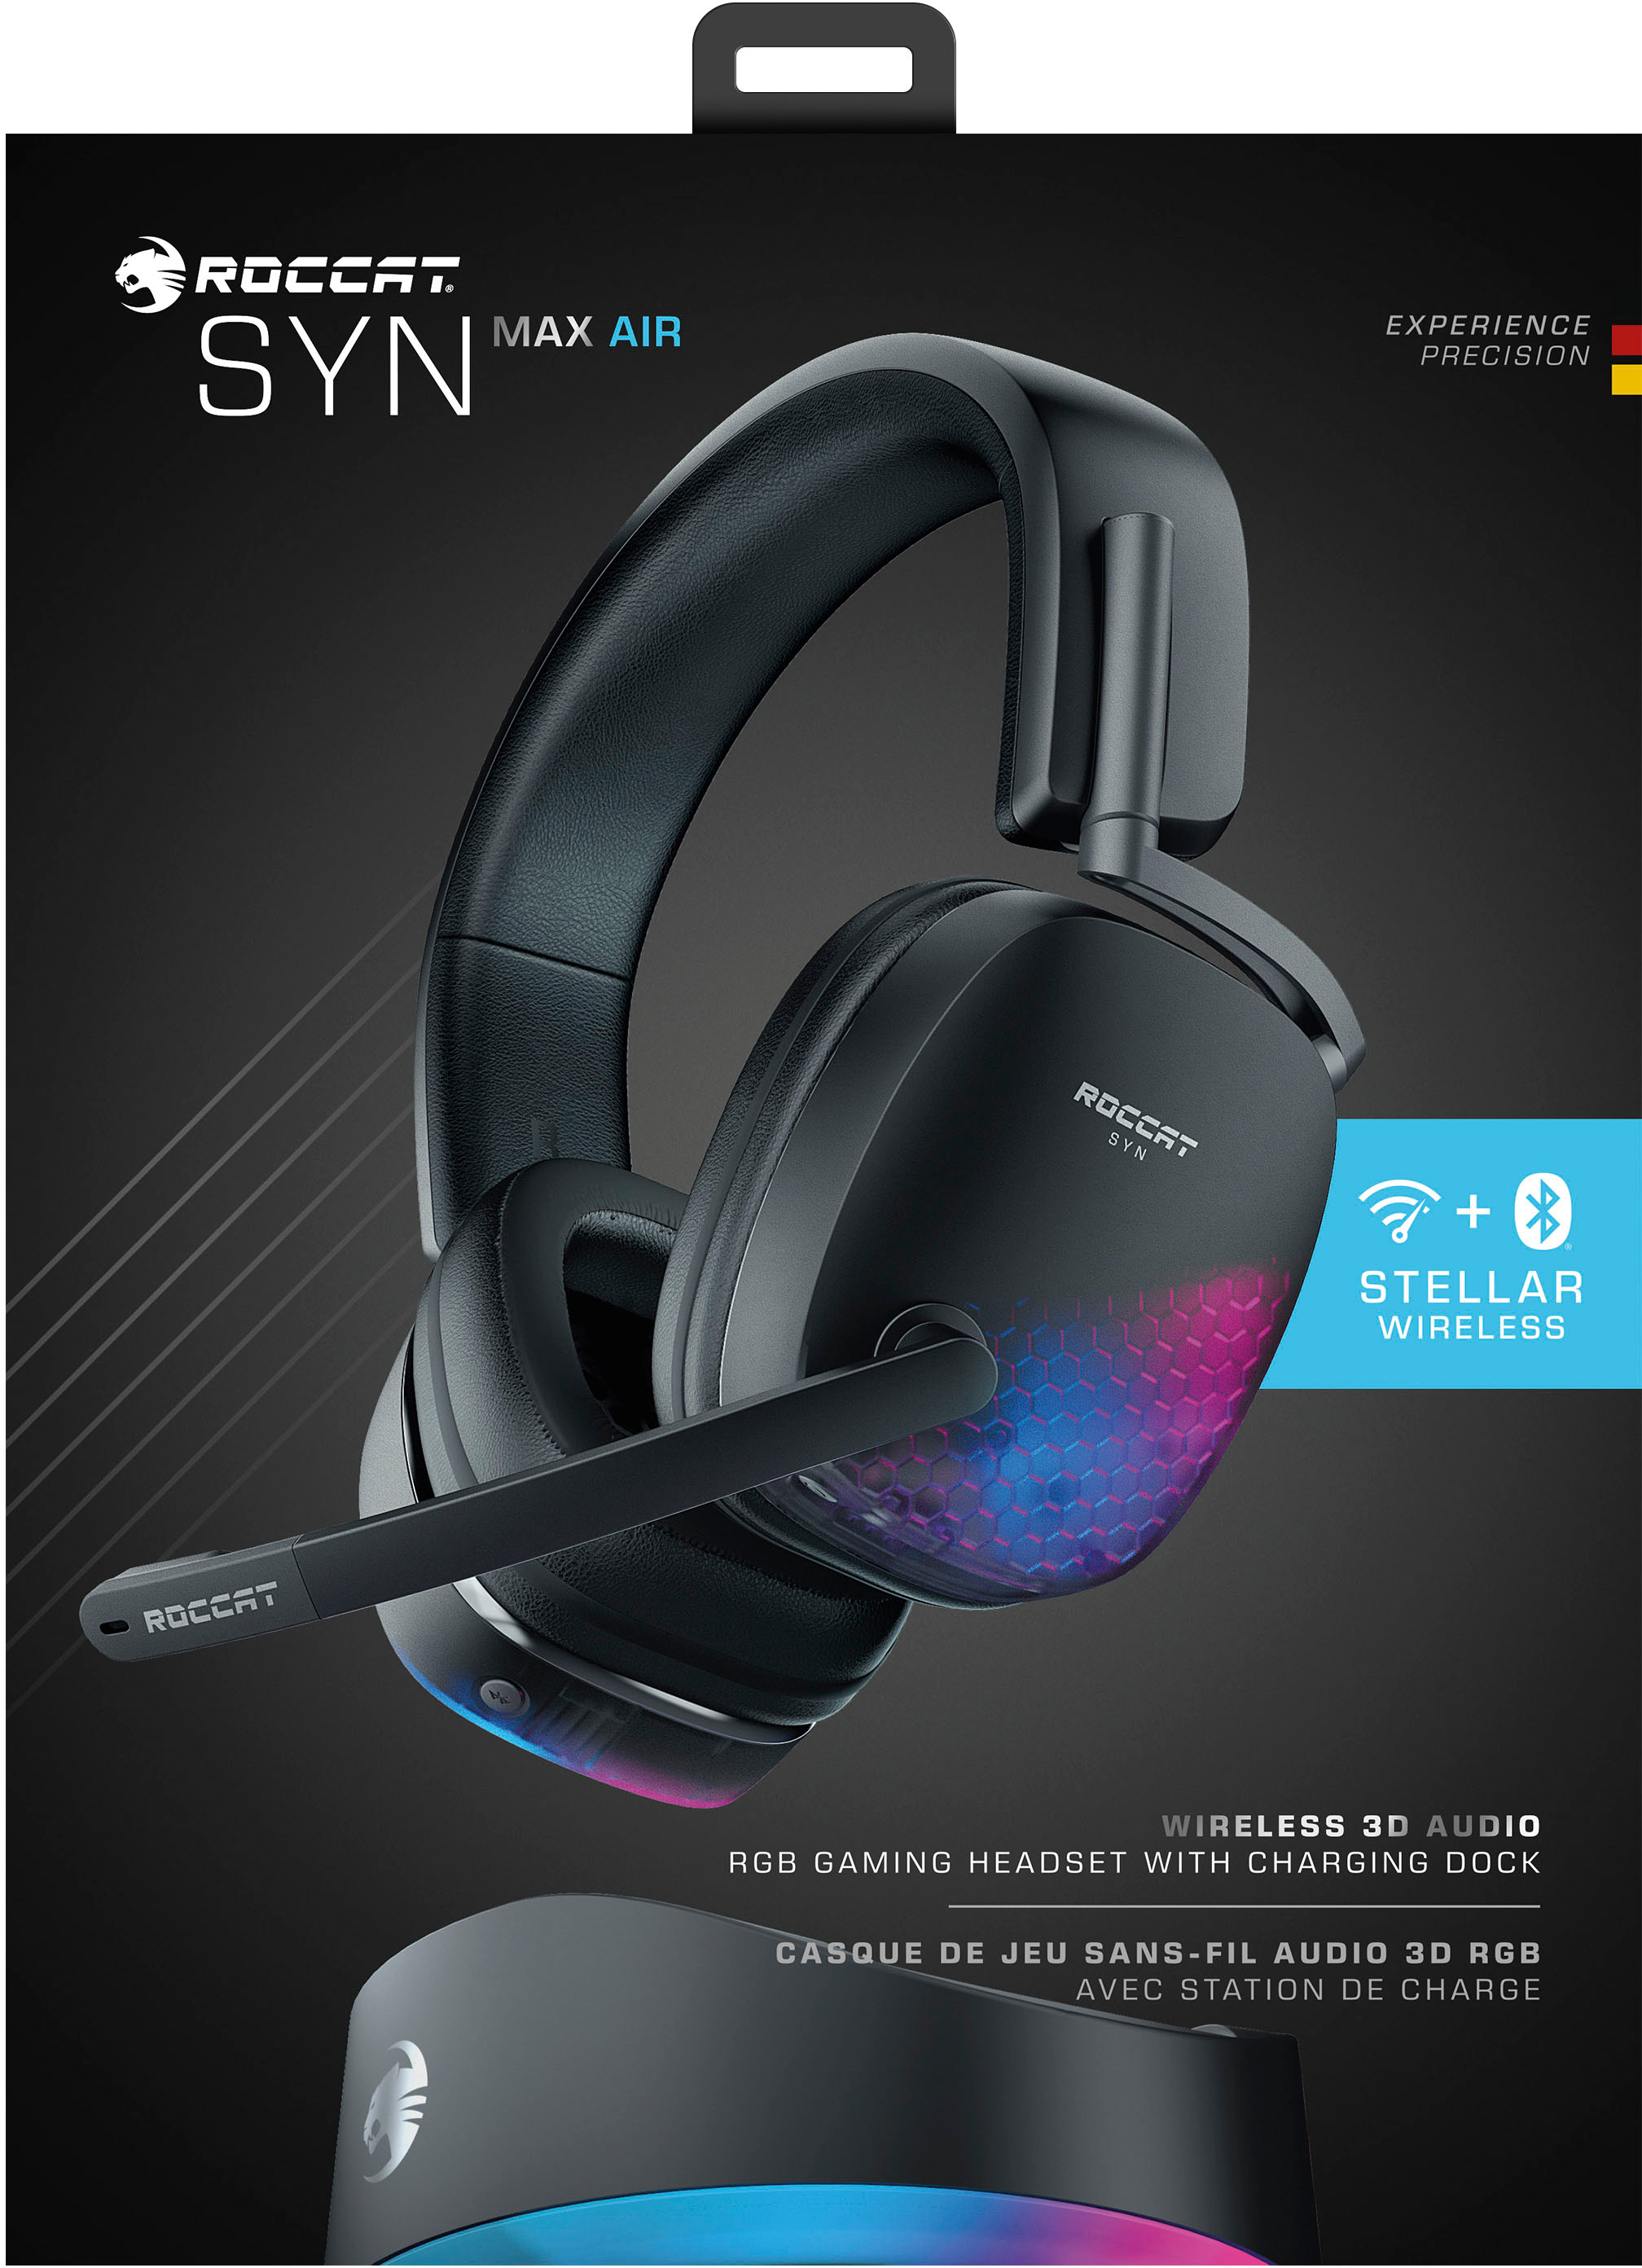 ROCCAT SYN Max Air Headset Buy ROC-14-155-01 PC for Black Best Gaming - Wireless